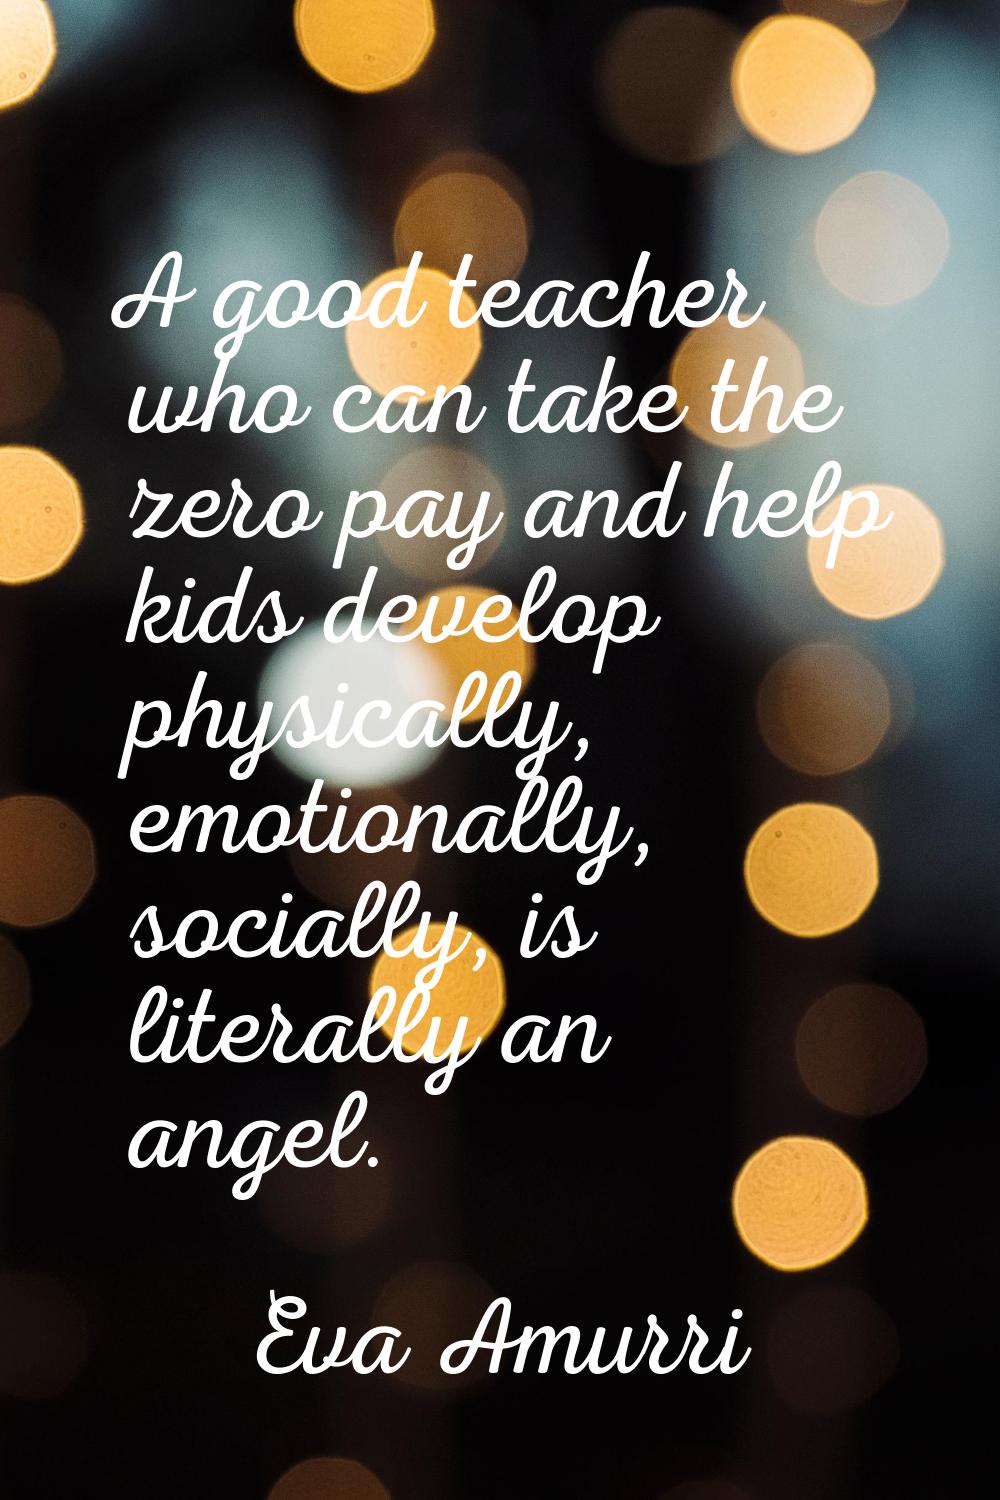 A good teacher who can take the zero pay and help kids develop physically, emotionally, socially, i